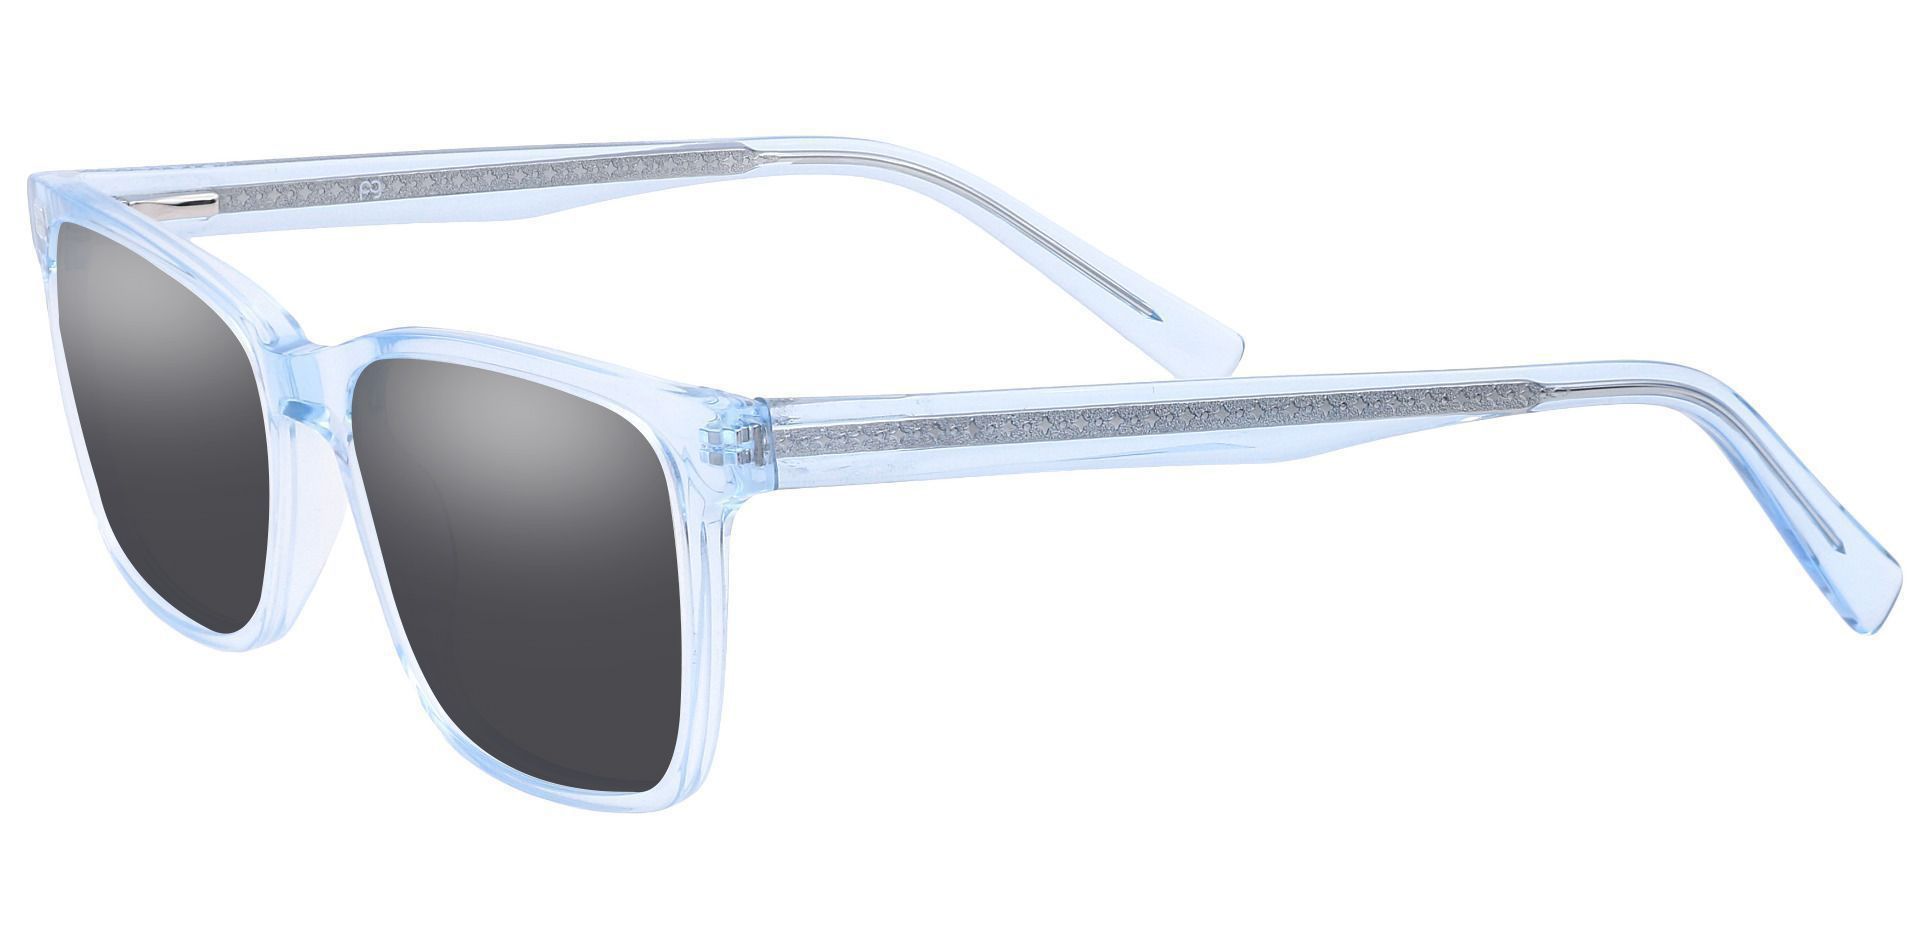 Galaxy Rectangle Lined Bifocal Sunglasses - Blue Frame With Gray Lenses